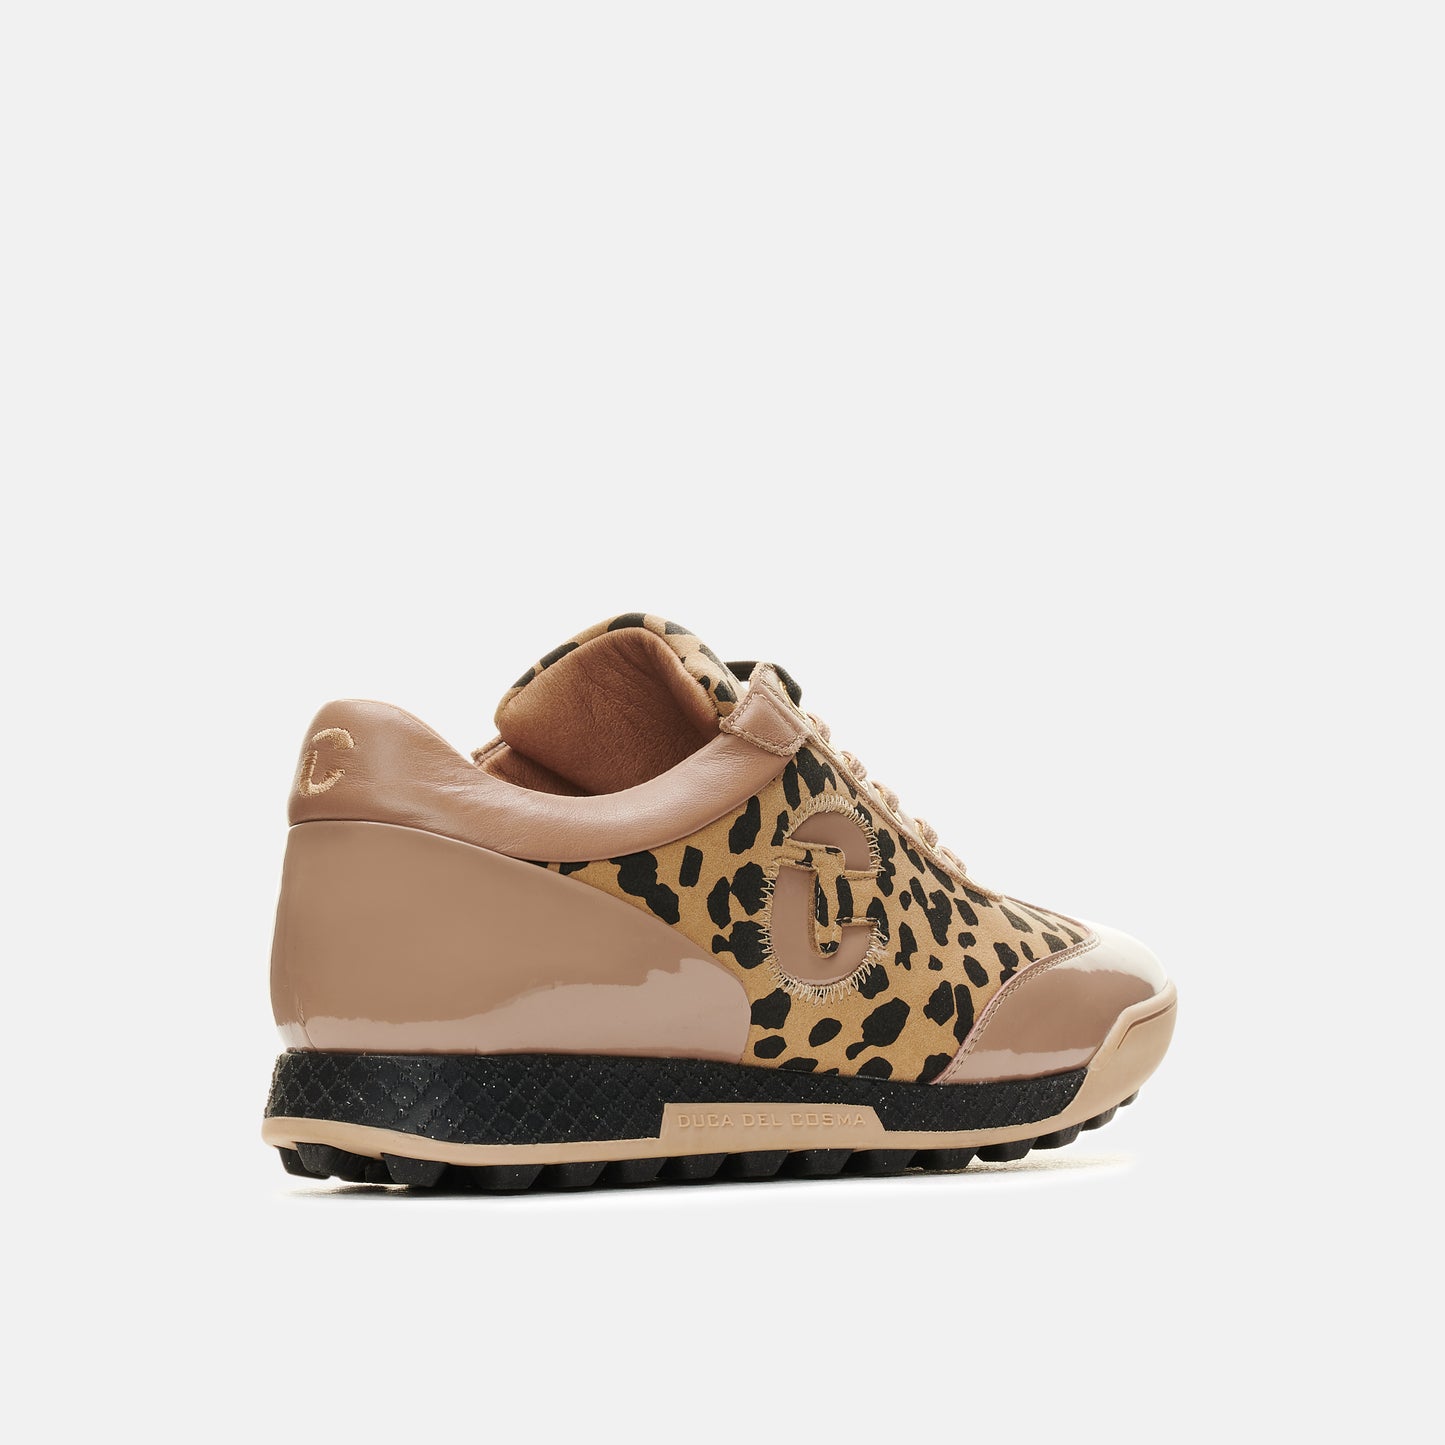 King Cheetah taupe Women's Golf shoe fully waterproof with animal print from duca del cosma